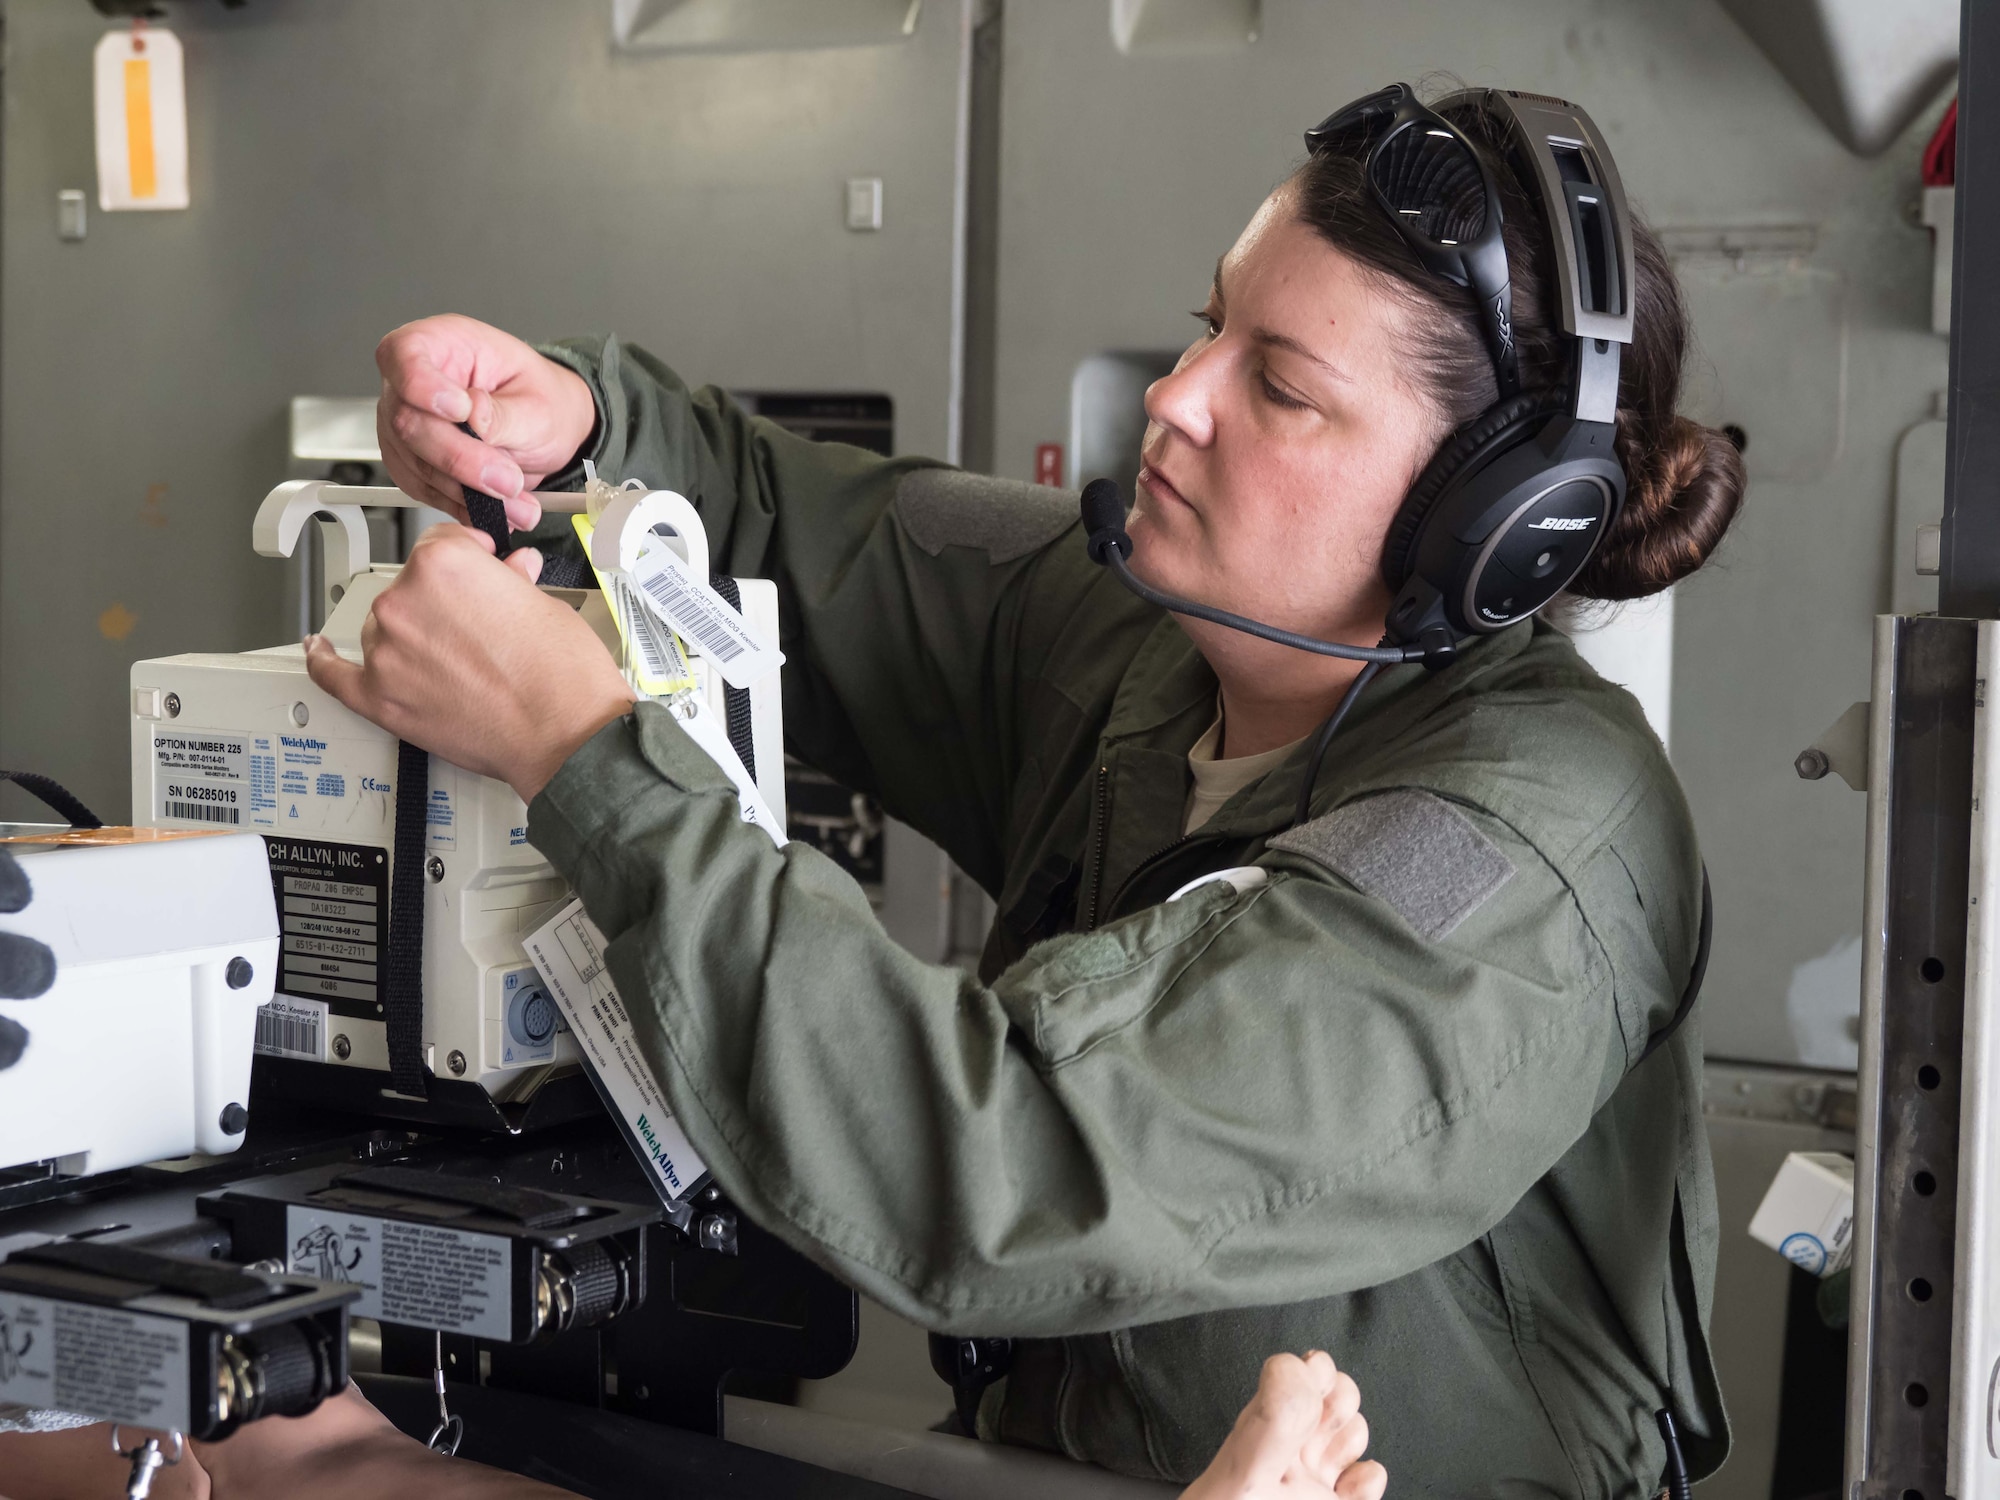 Staff Sgt. Nicole Richards, 81st Medical Group, Keesler AFB, Miss., prepares life support equipment for critical care transport. (Air Force Photo/Paul Zadach)